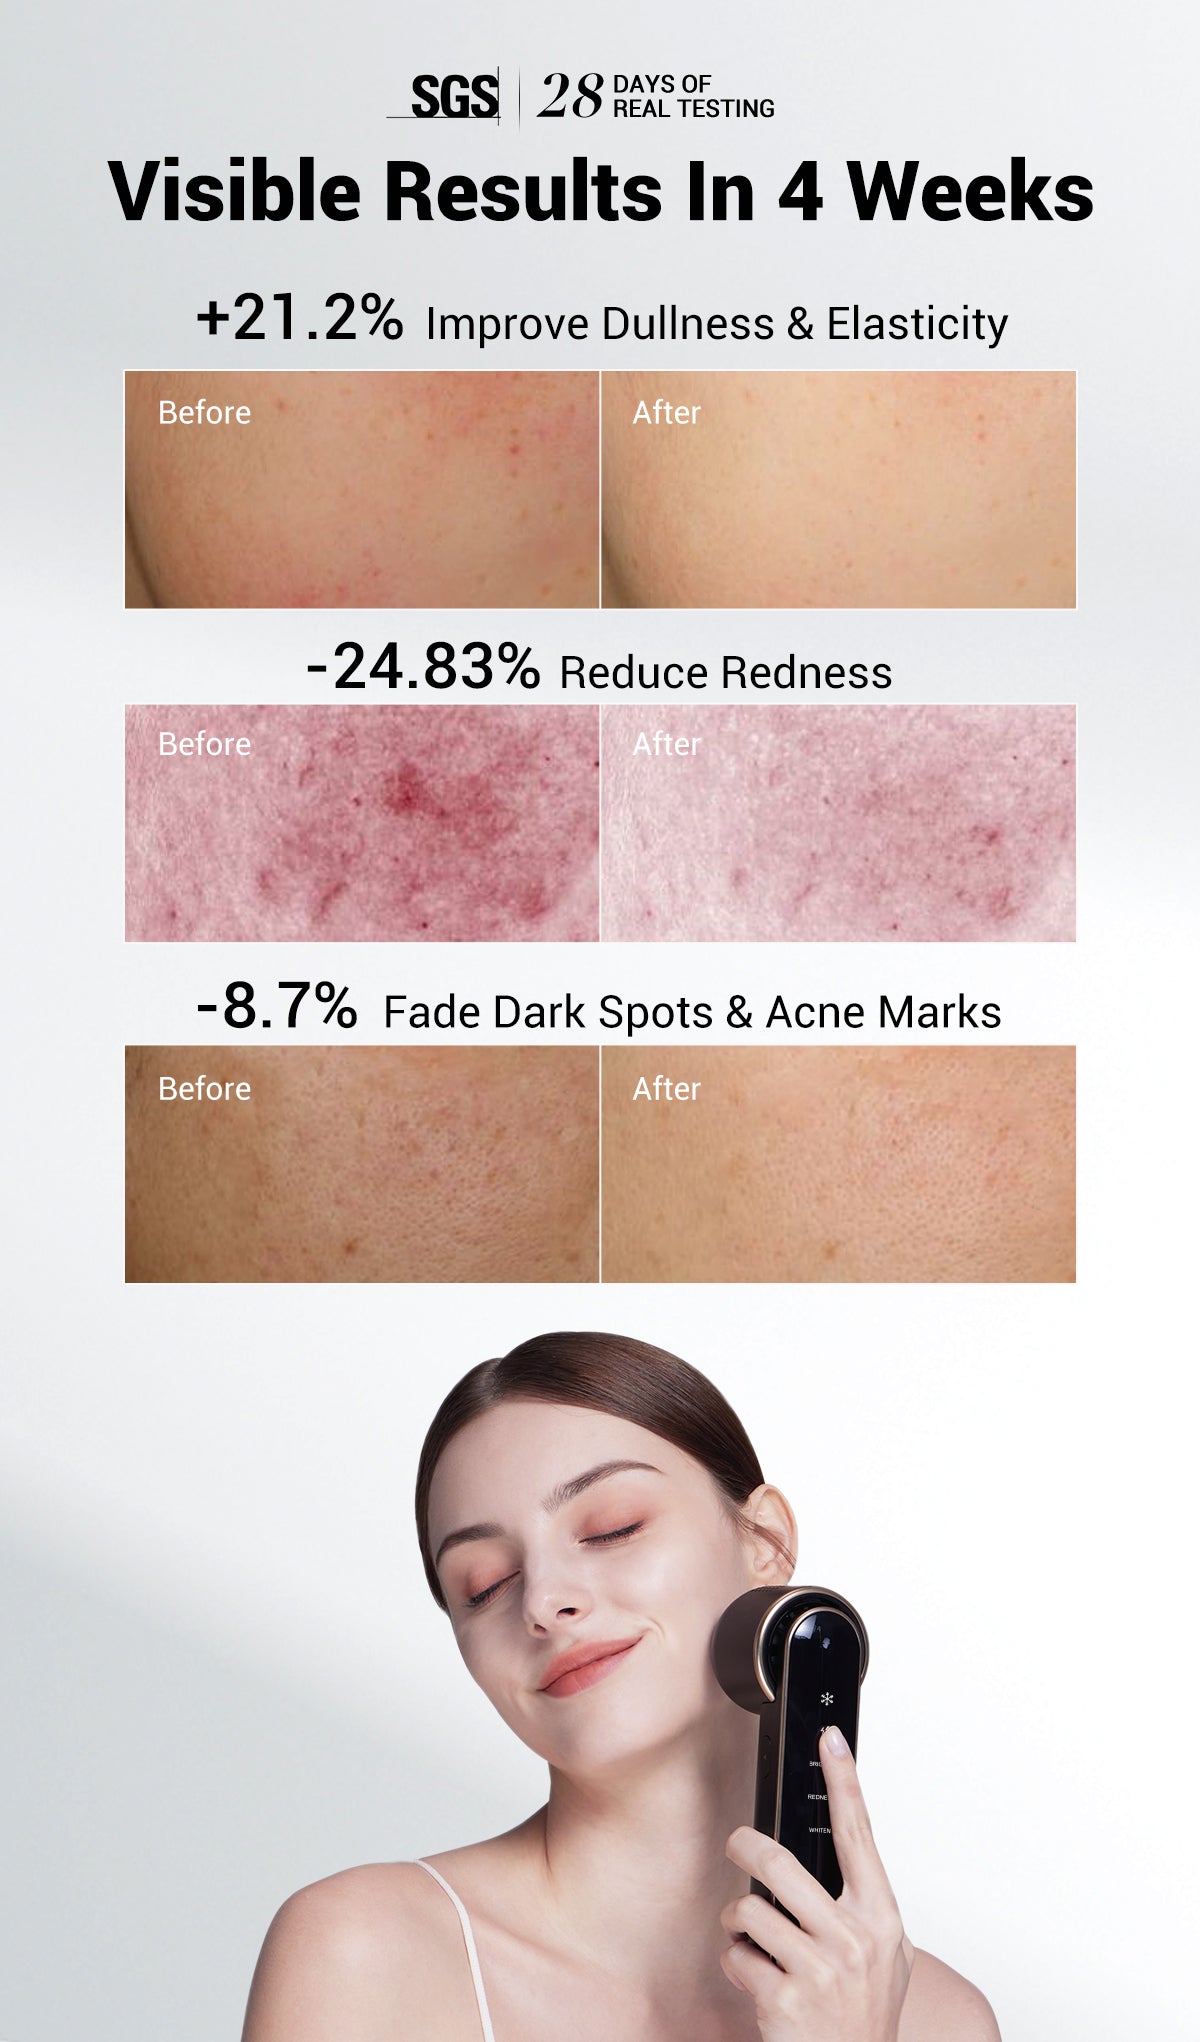 JOVS Blacken Photorejuvenation Device showing visible results in 4 weeks, reducing redness and dark spots while improving skin's dullness and elasticity.